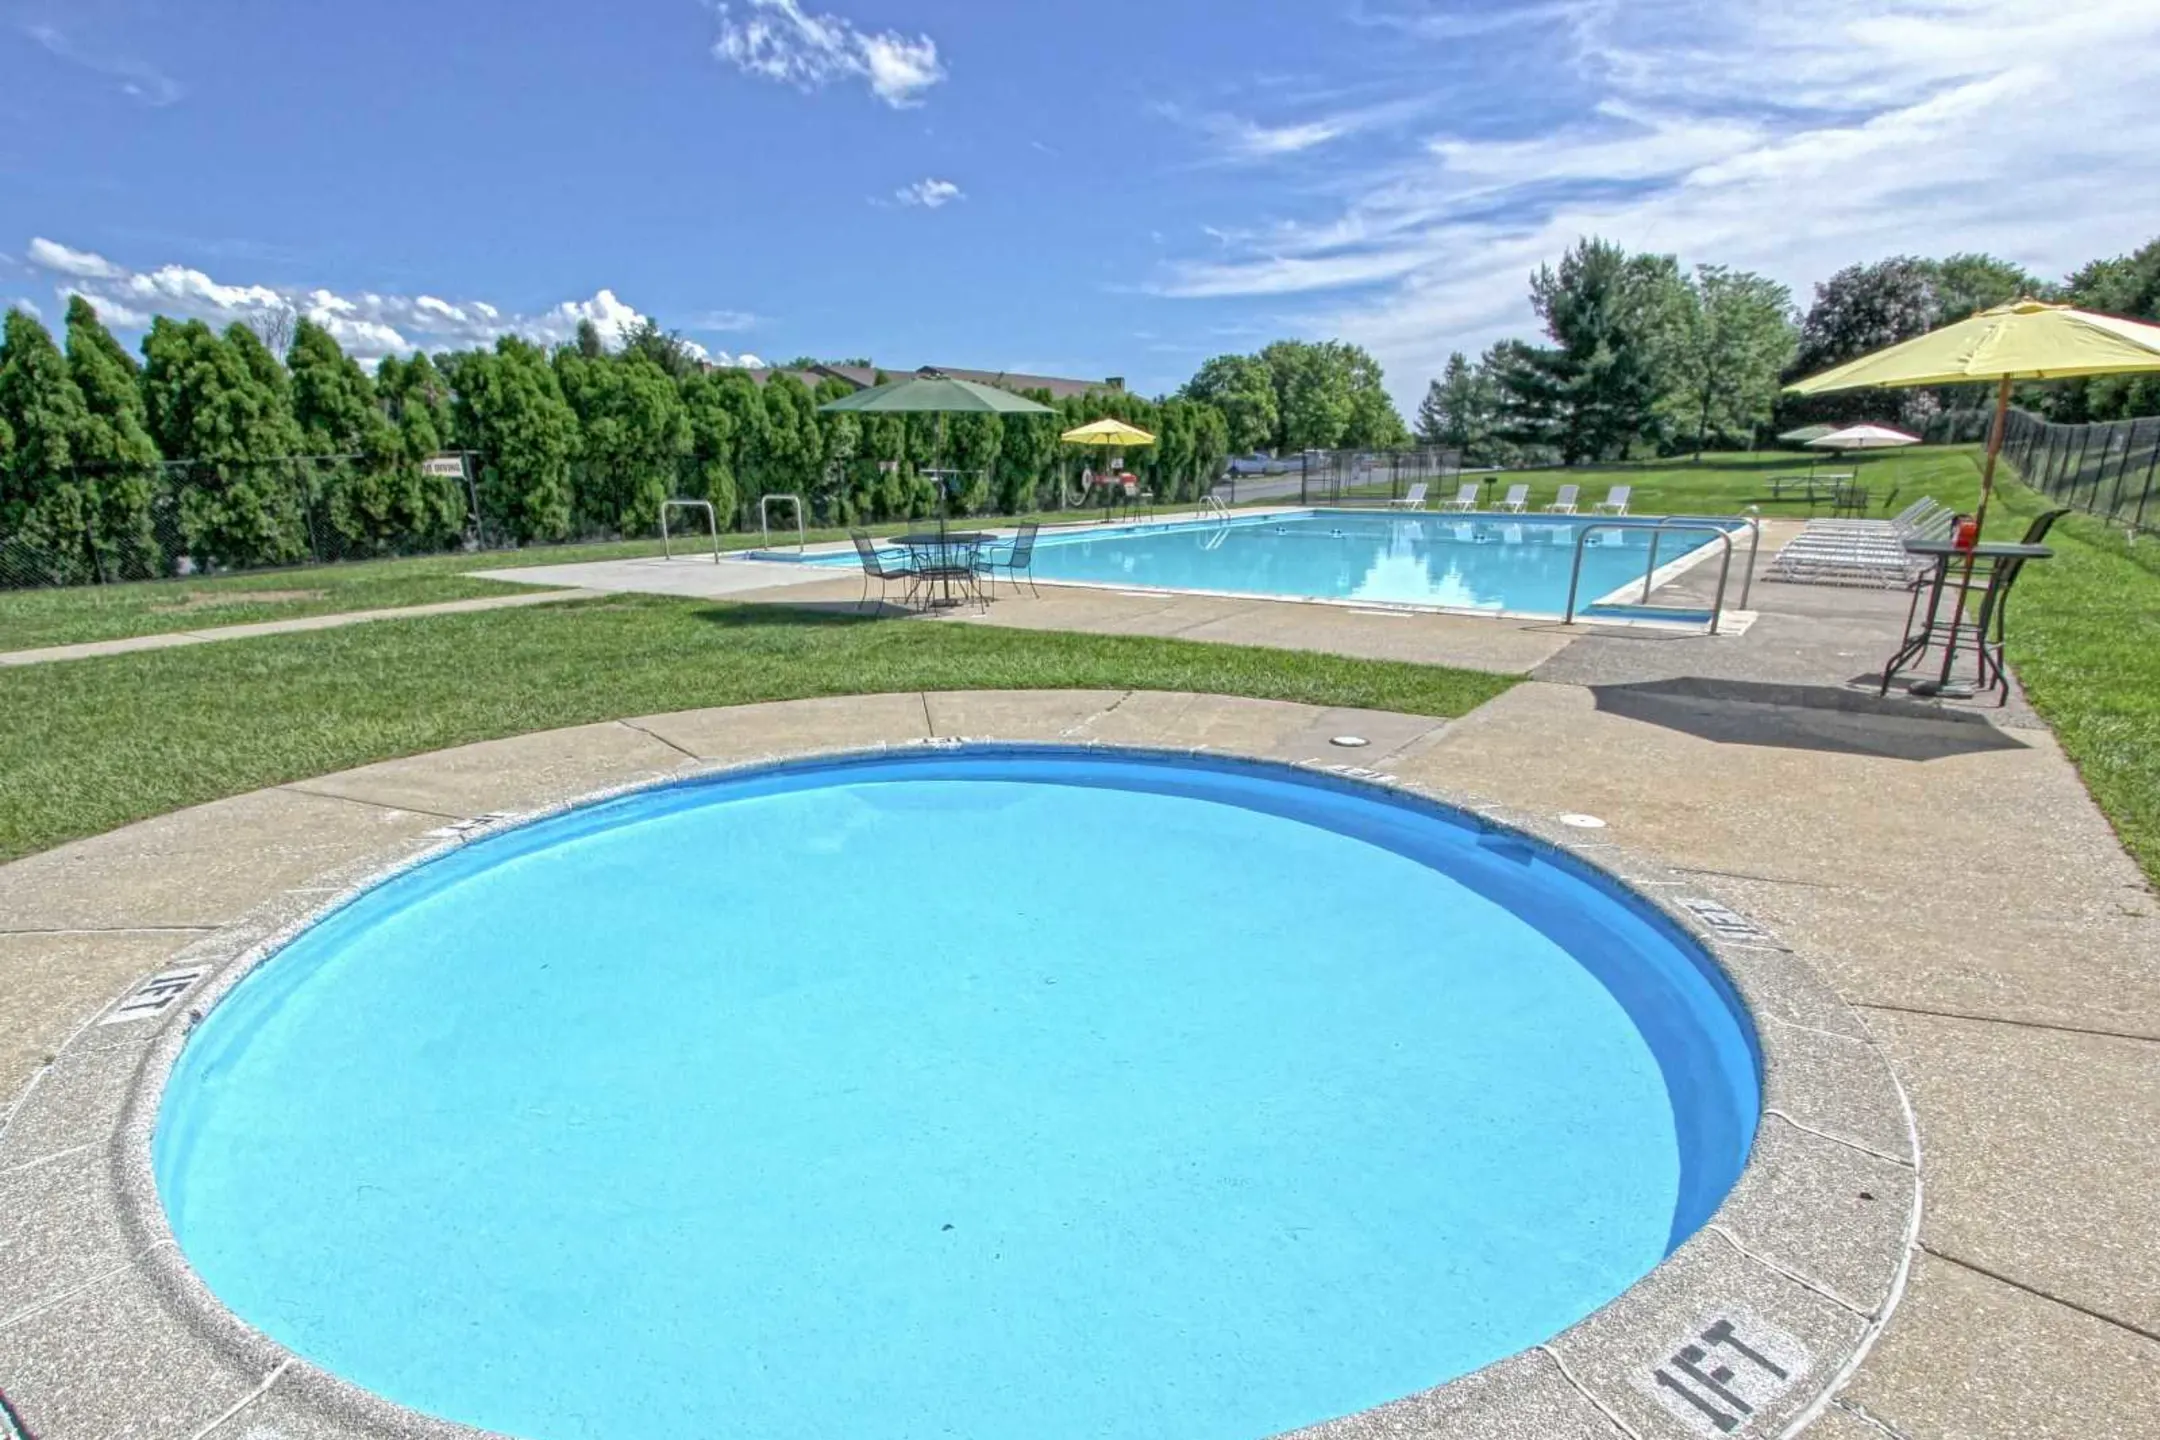 Pool - Pennswood Apartments & Townhomes - Harrisburg, PA